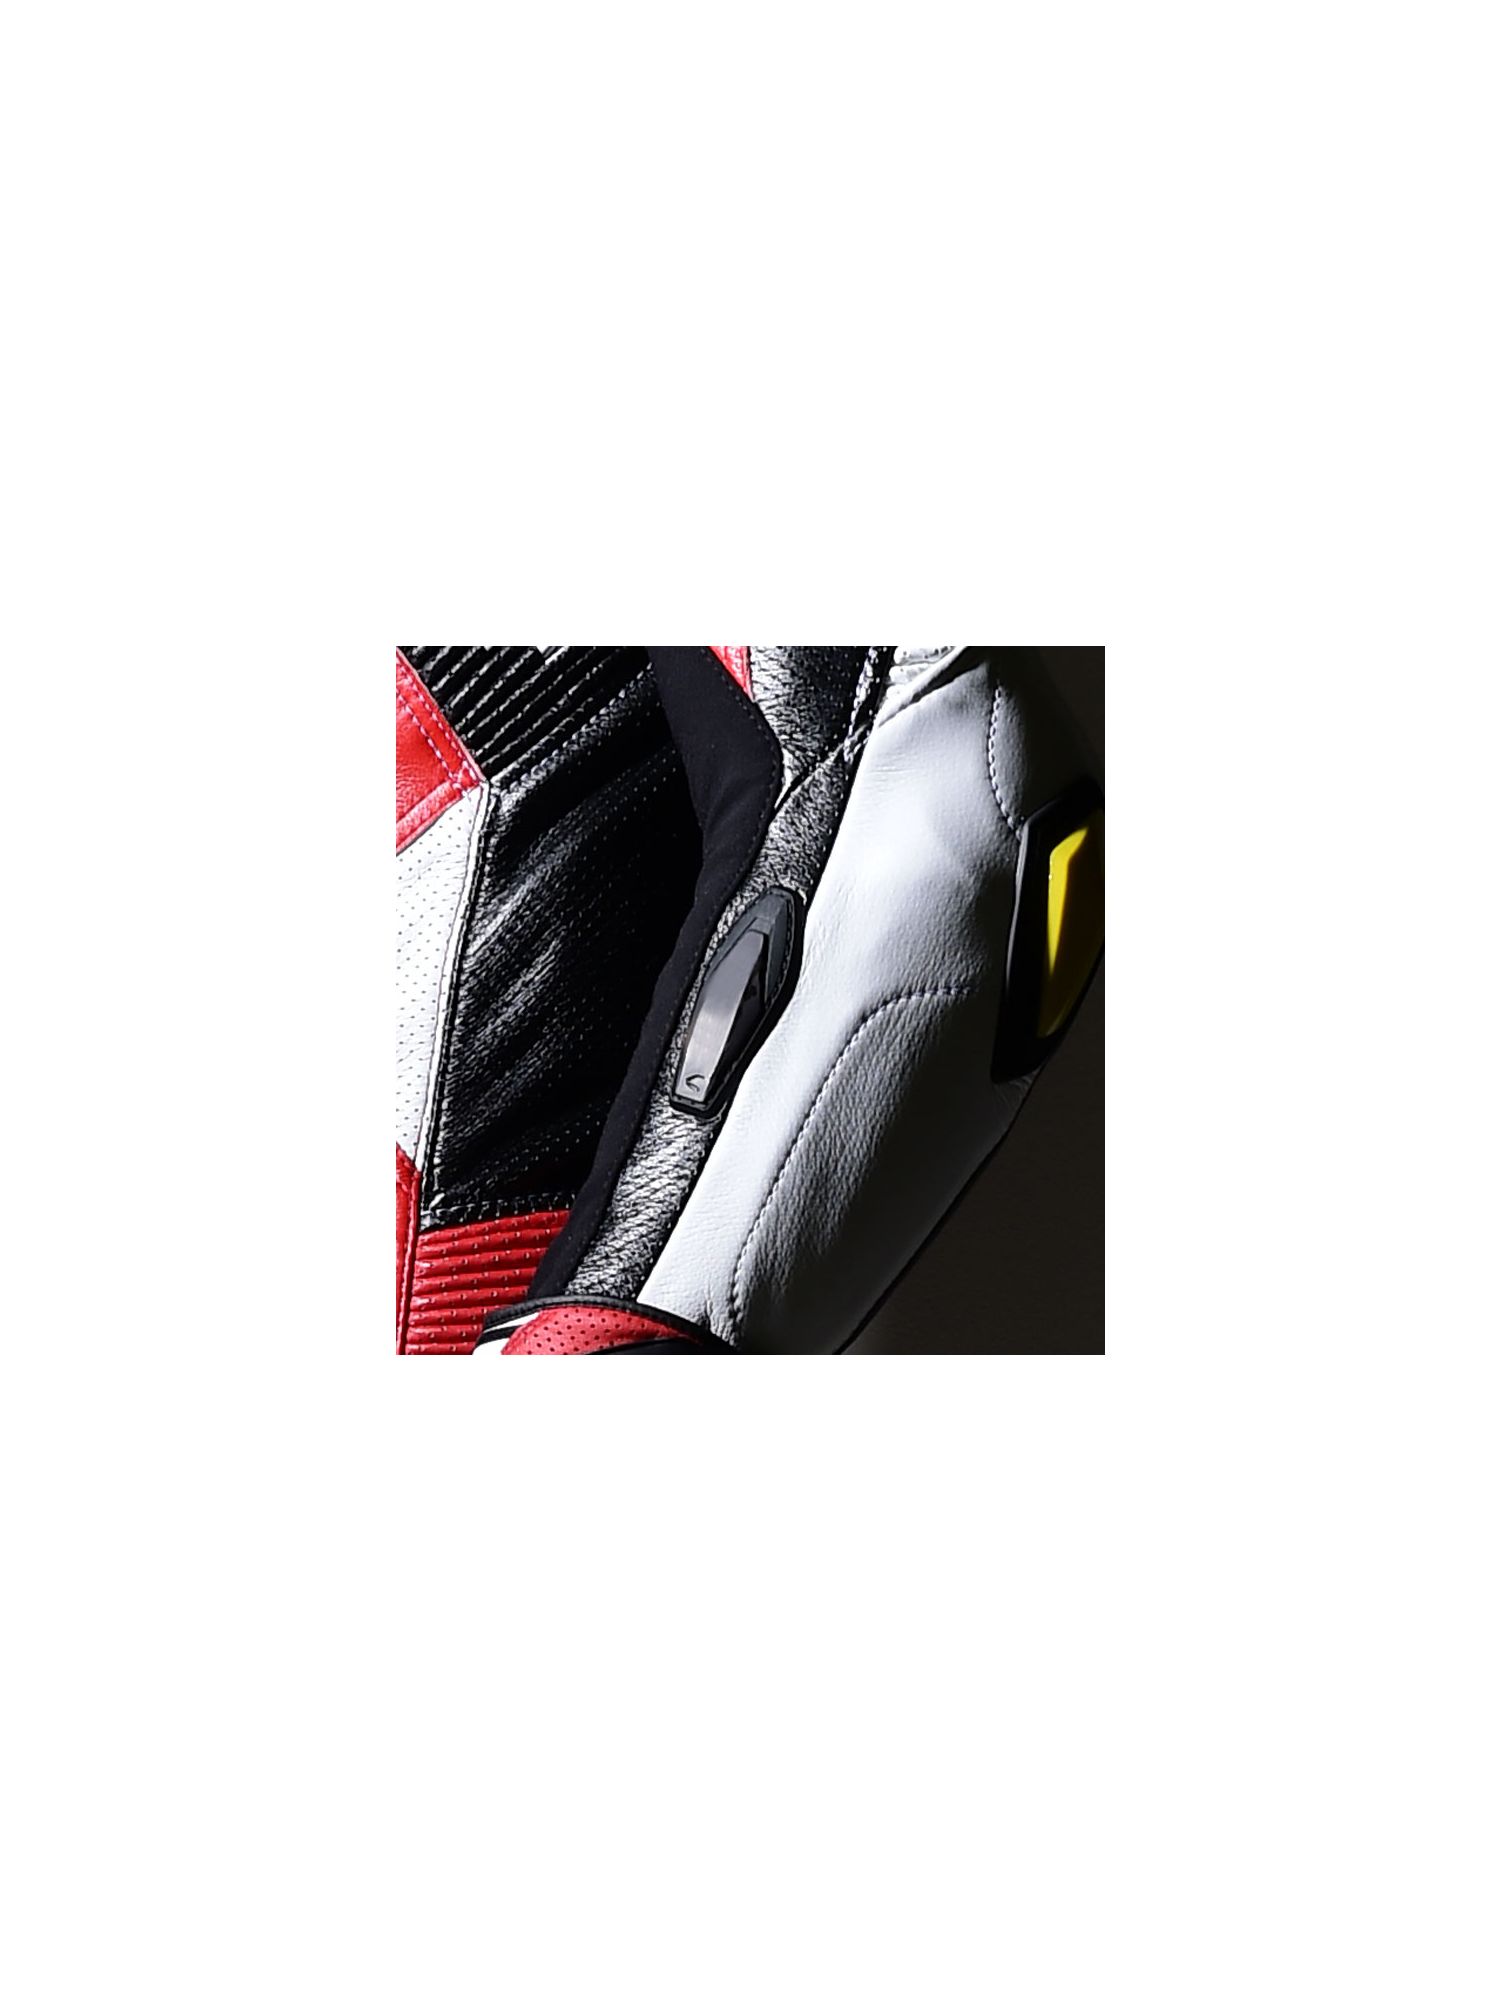 NXL103 | GP-MAX R103 LEATHER SUIT［3colors］